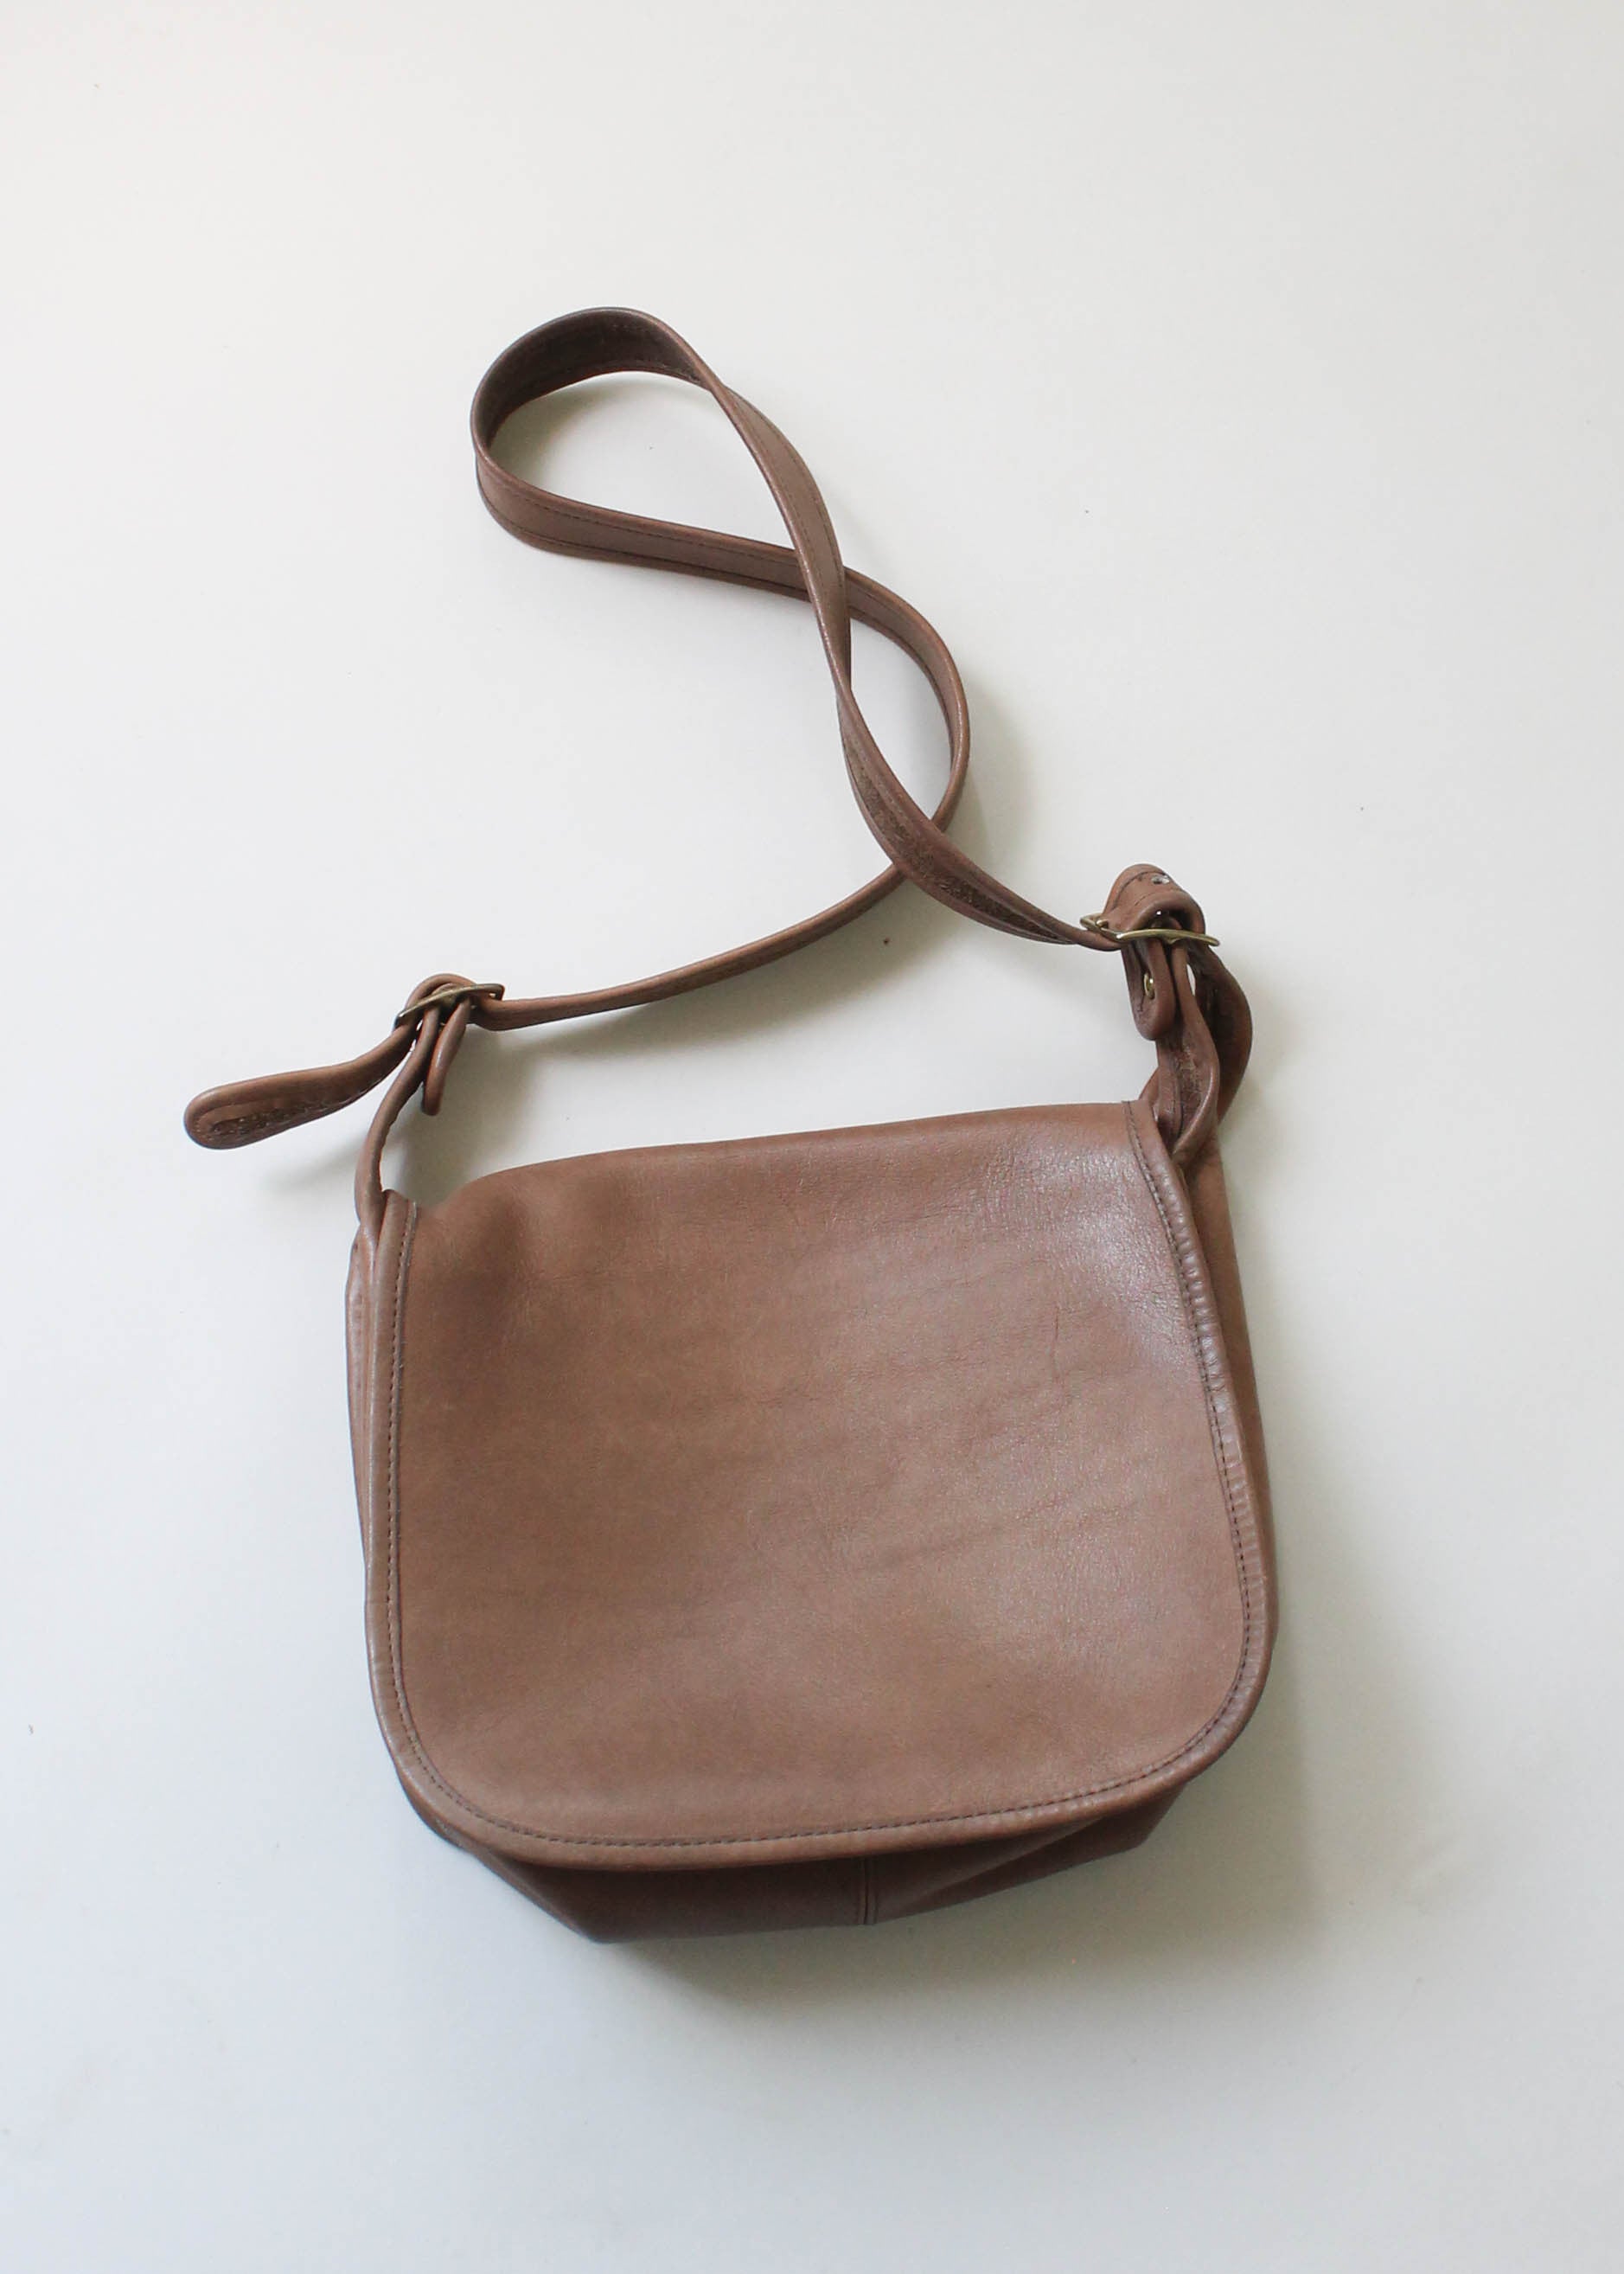 Free People Vintage Coach Brown Leather Purse